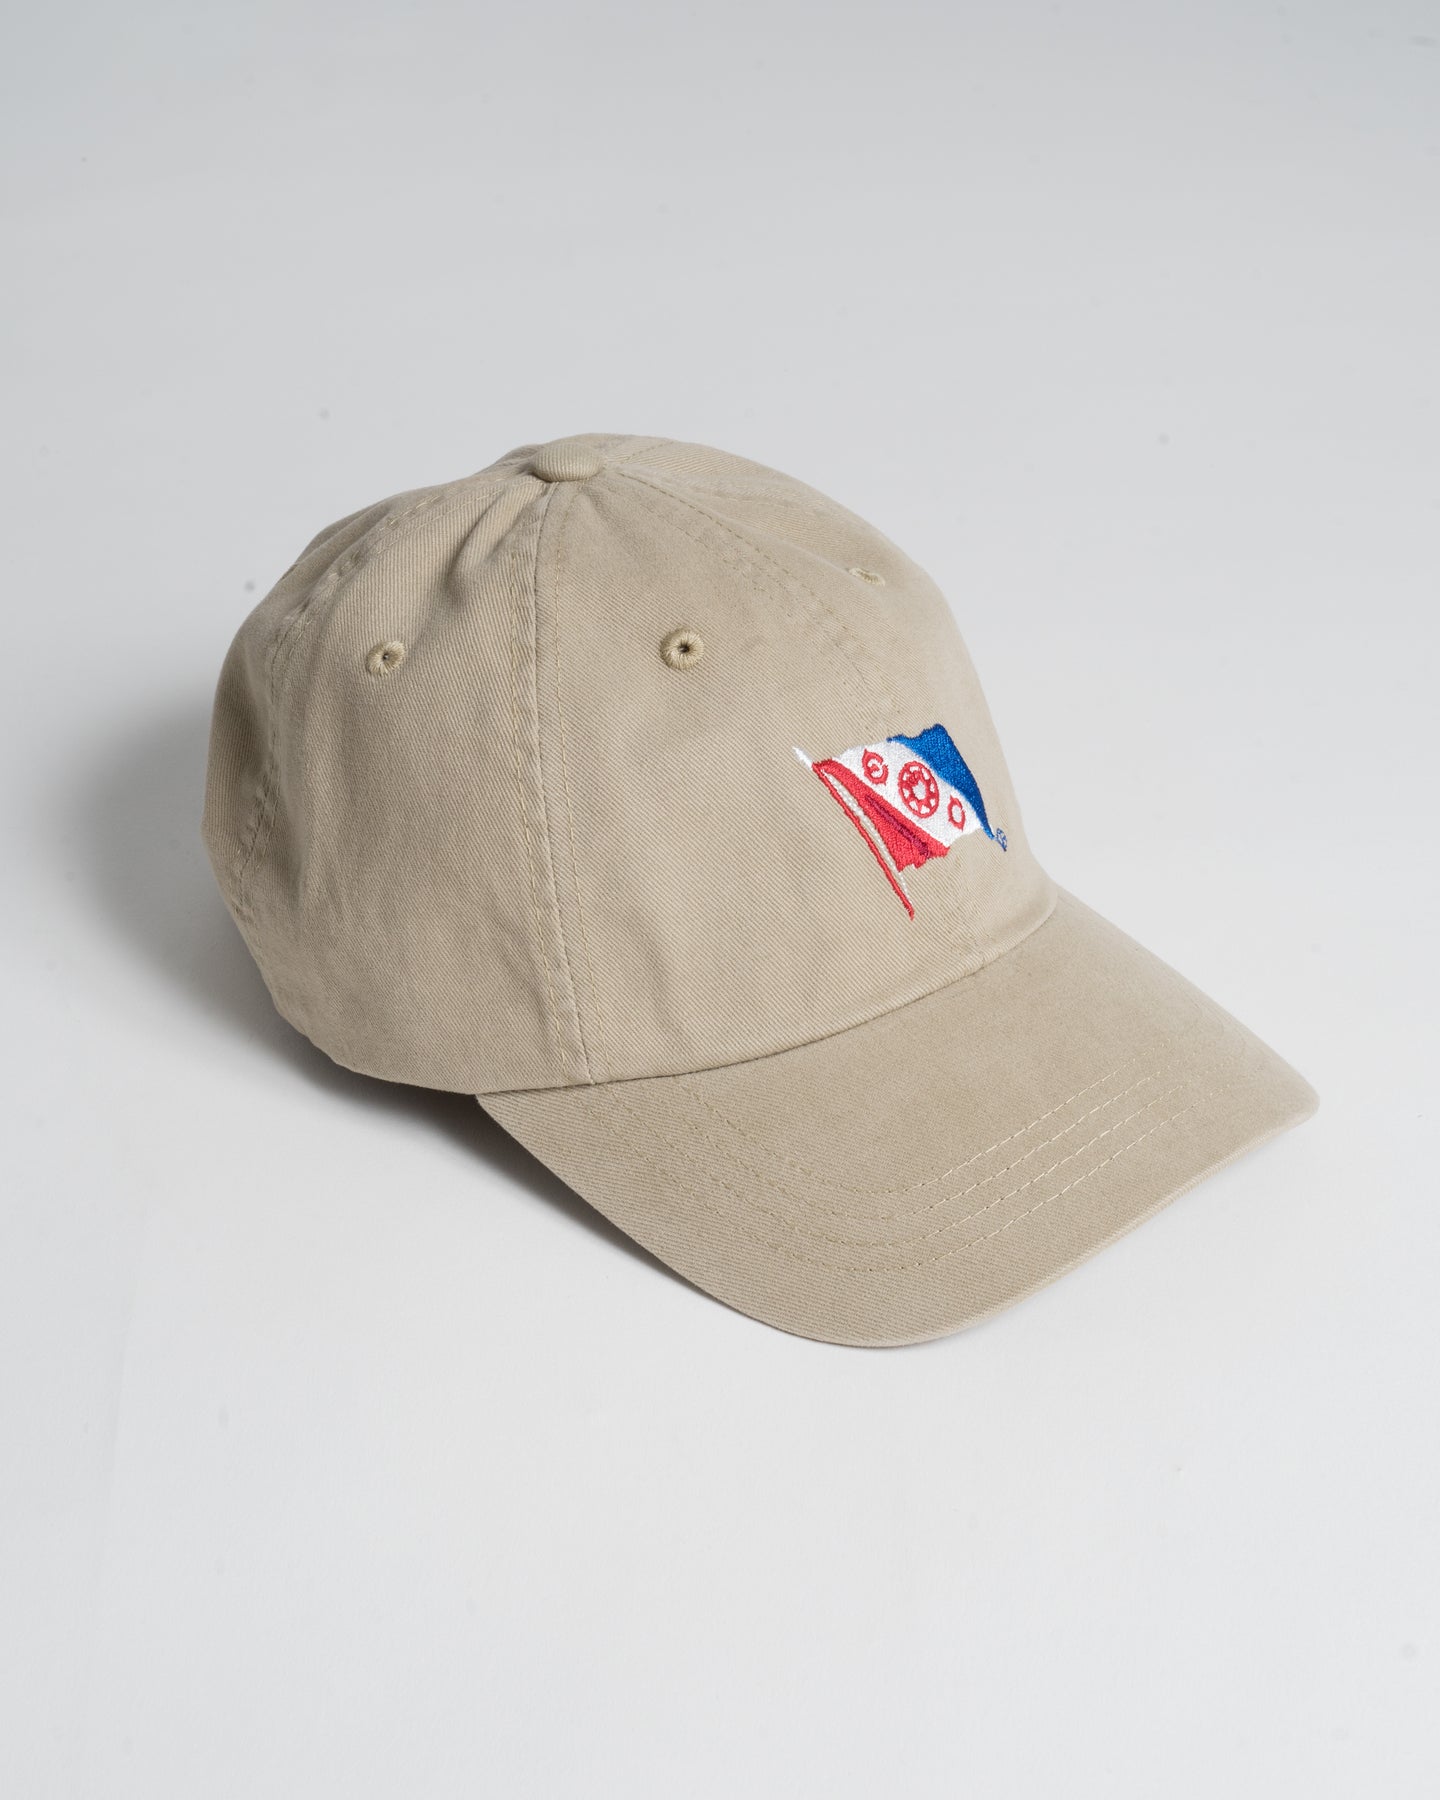 Ung dame praktiseret lave mad Classic Twill Baseball Cap - The Explorers Club Outfitters